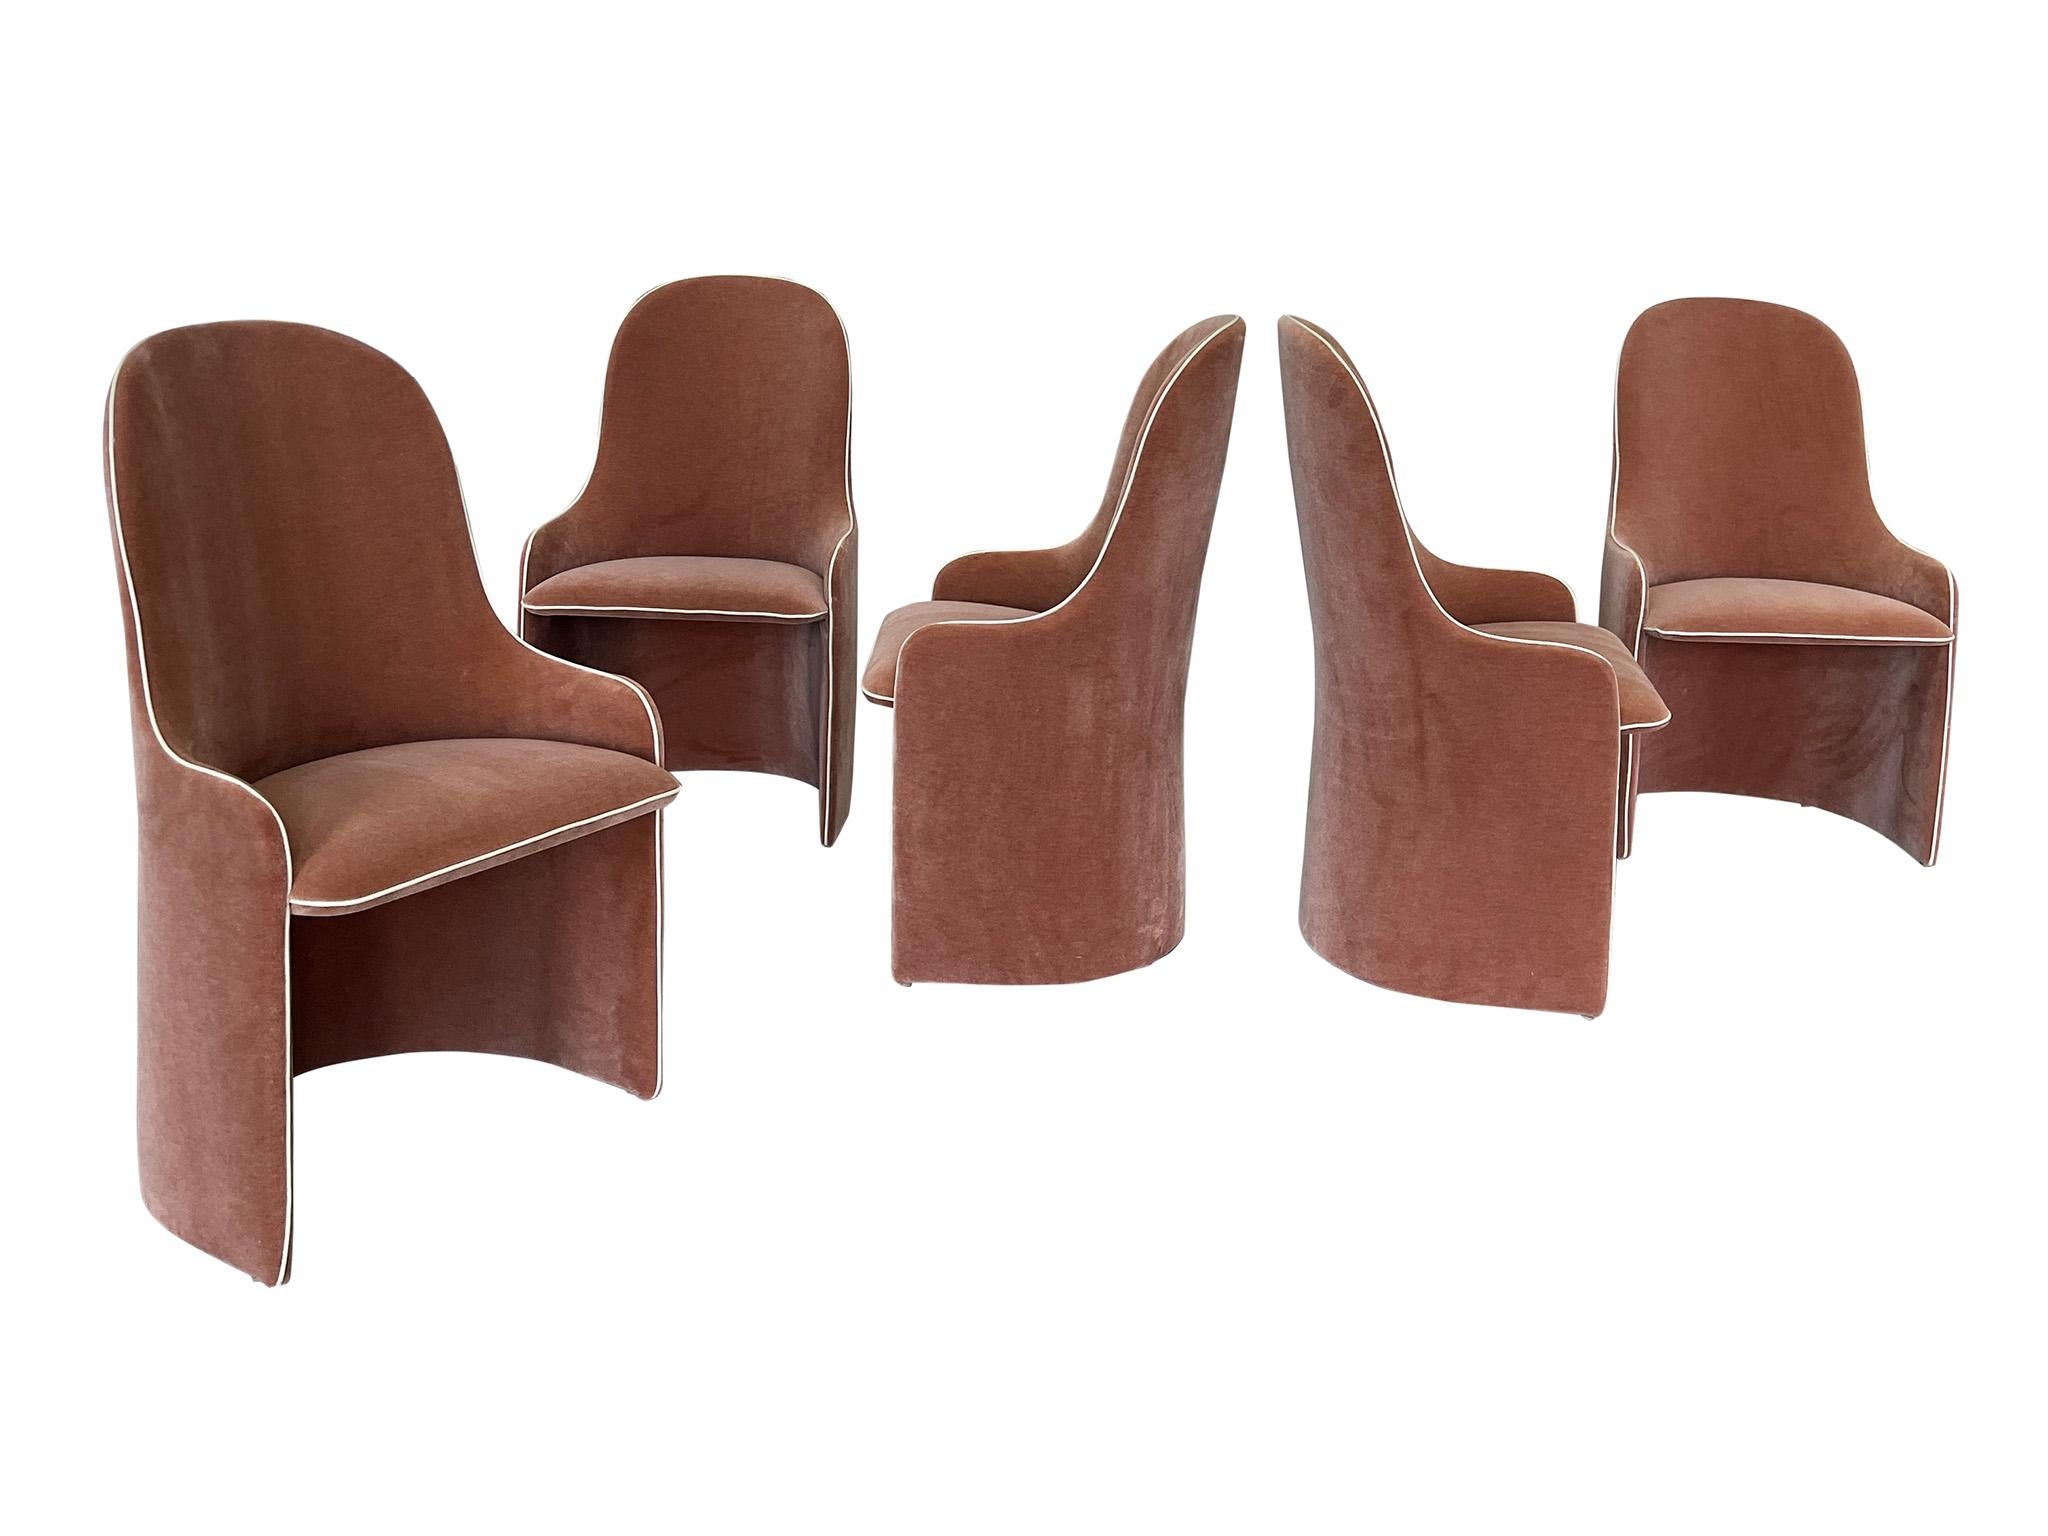 Fabulous set of 5 Italian Post-Modern barrel-back dining chairs, in the style of Luigi Massoni or Karl Springer. The chairs are designed with the sloping curves and seamless edges that characterize Italian Post-Modern furniture design. The chairs